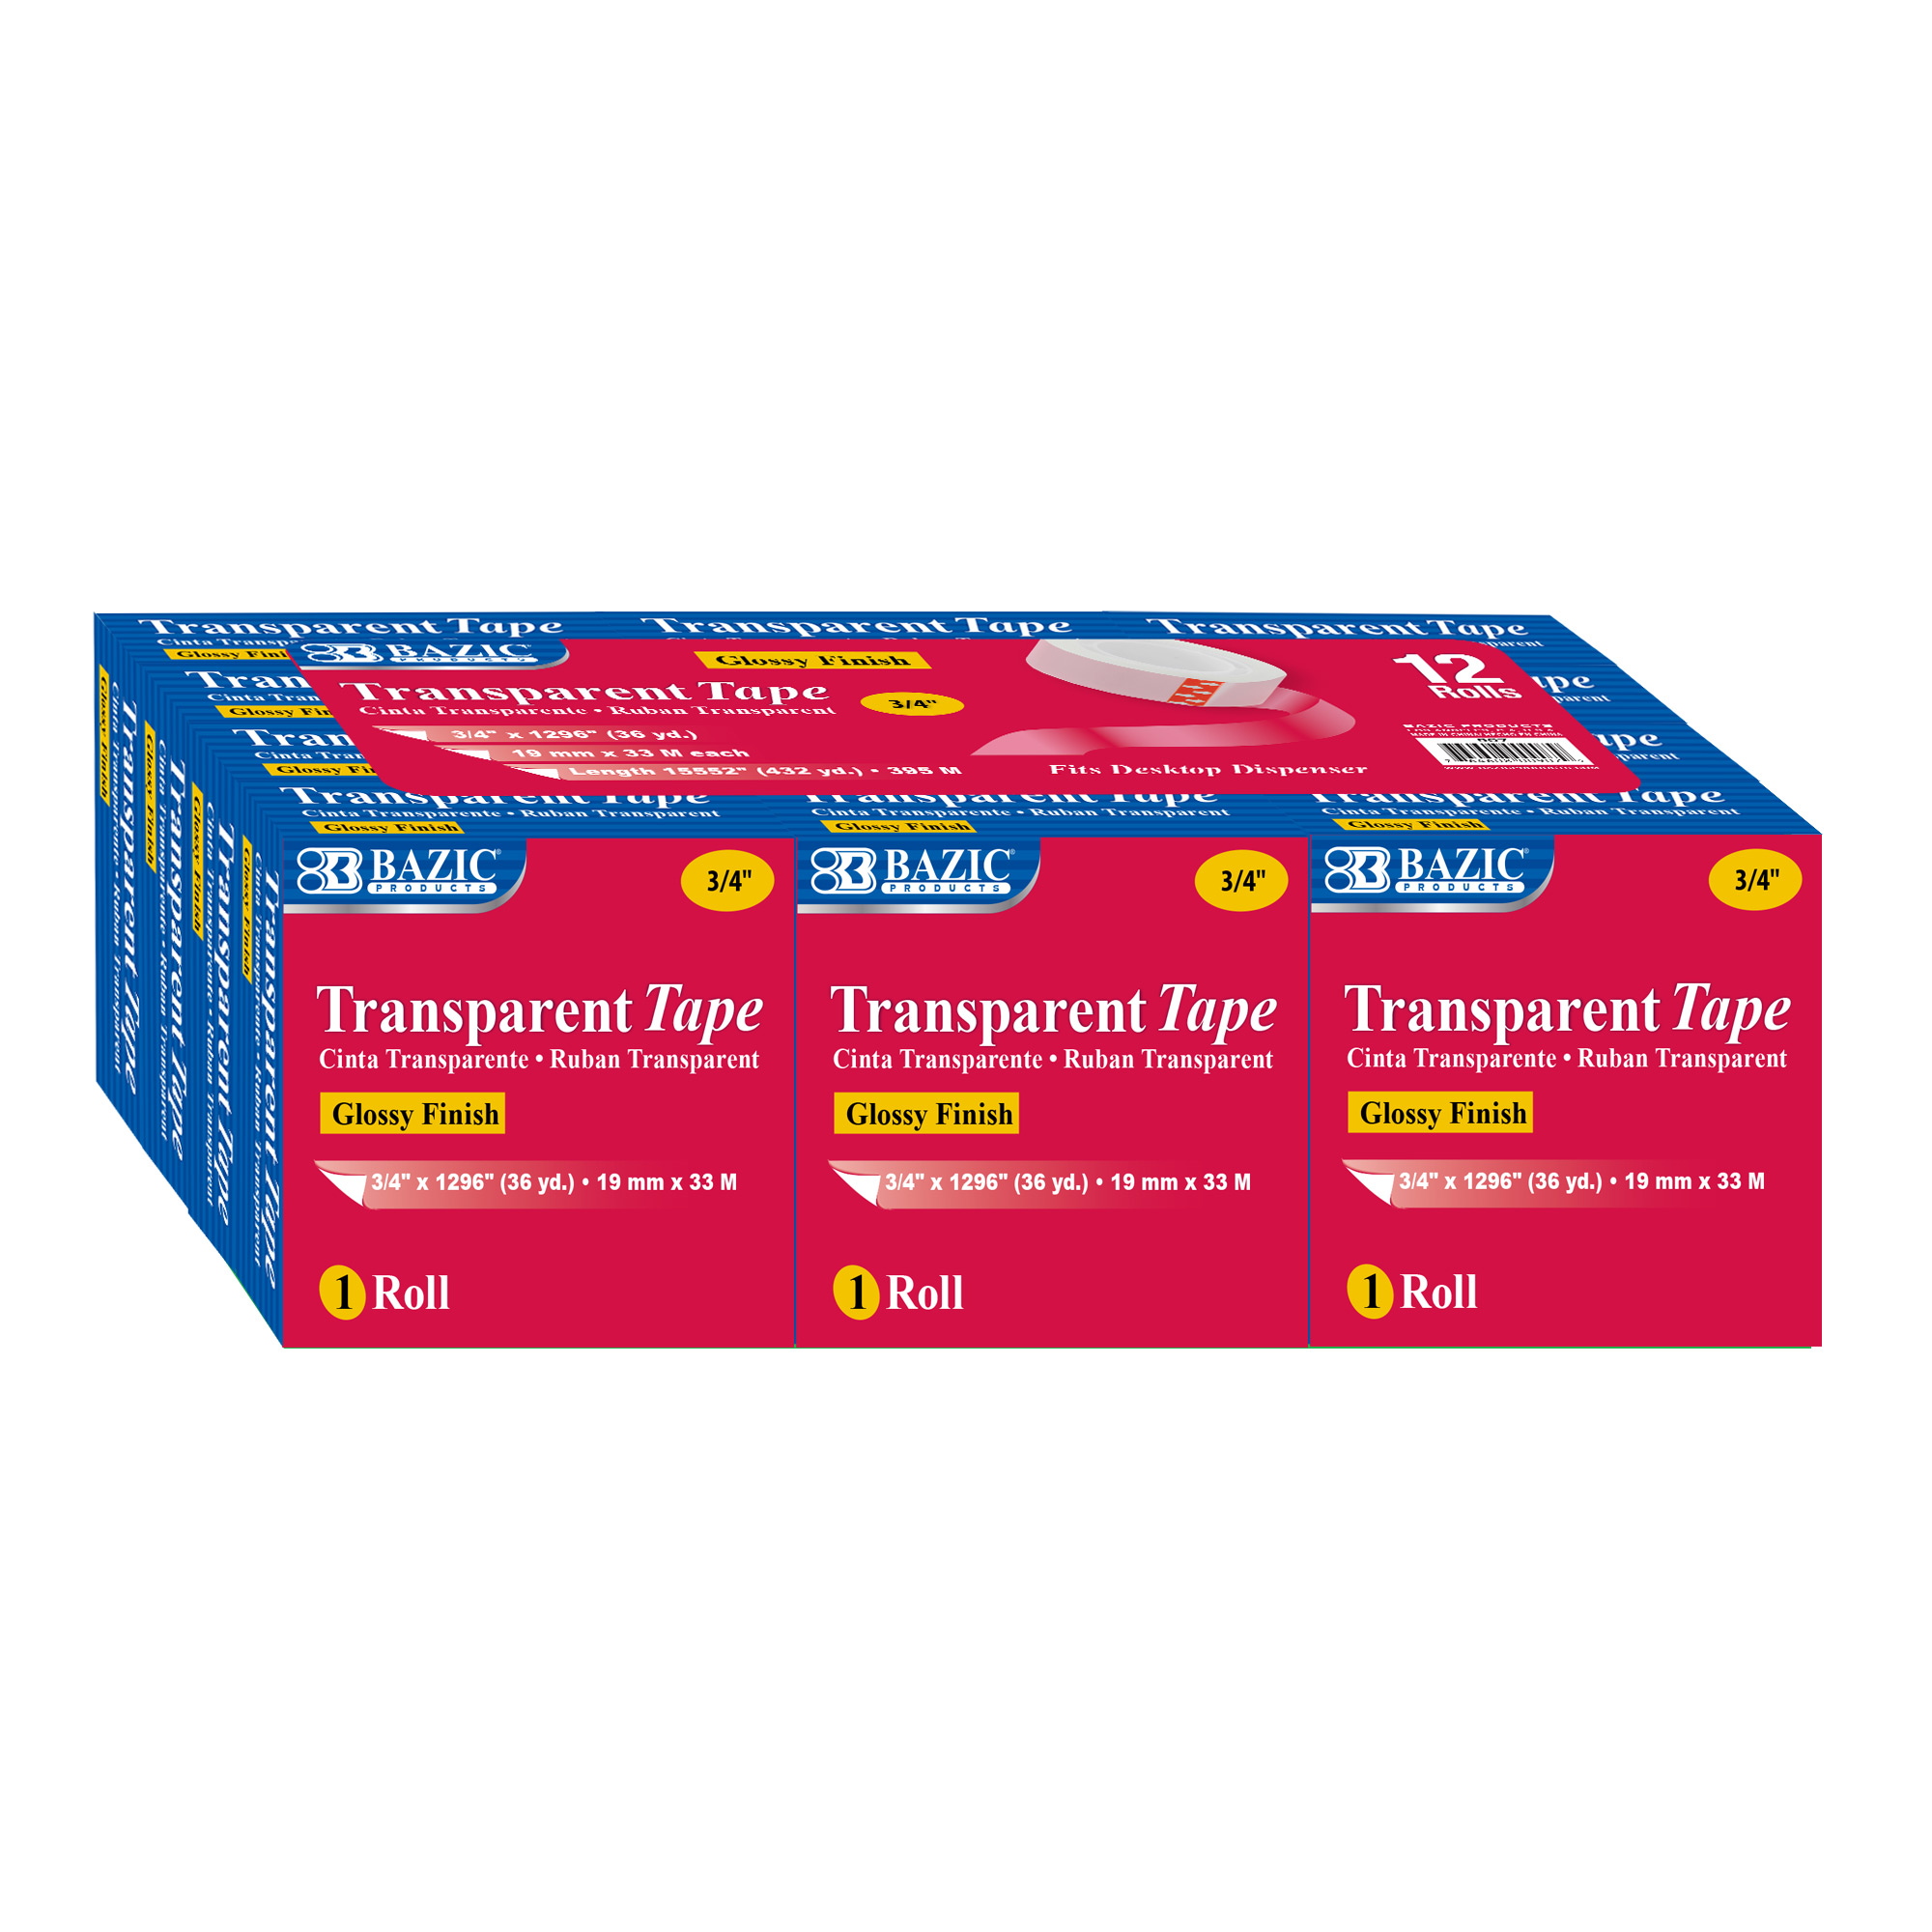 BAZIC 3/4 X 1296 Transparent Tape Refill (12/Pack) Bazic Products